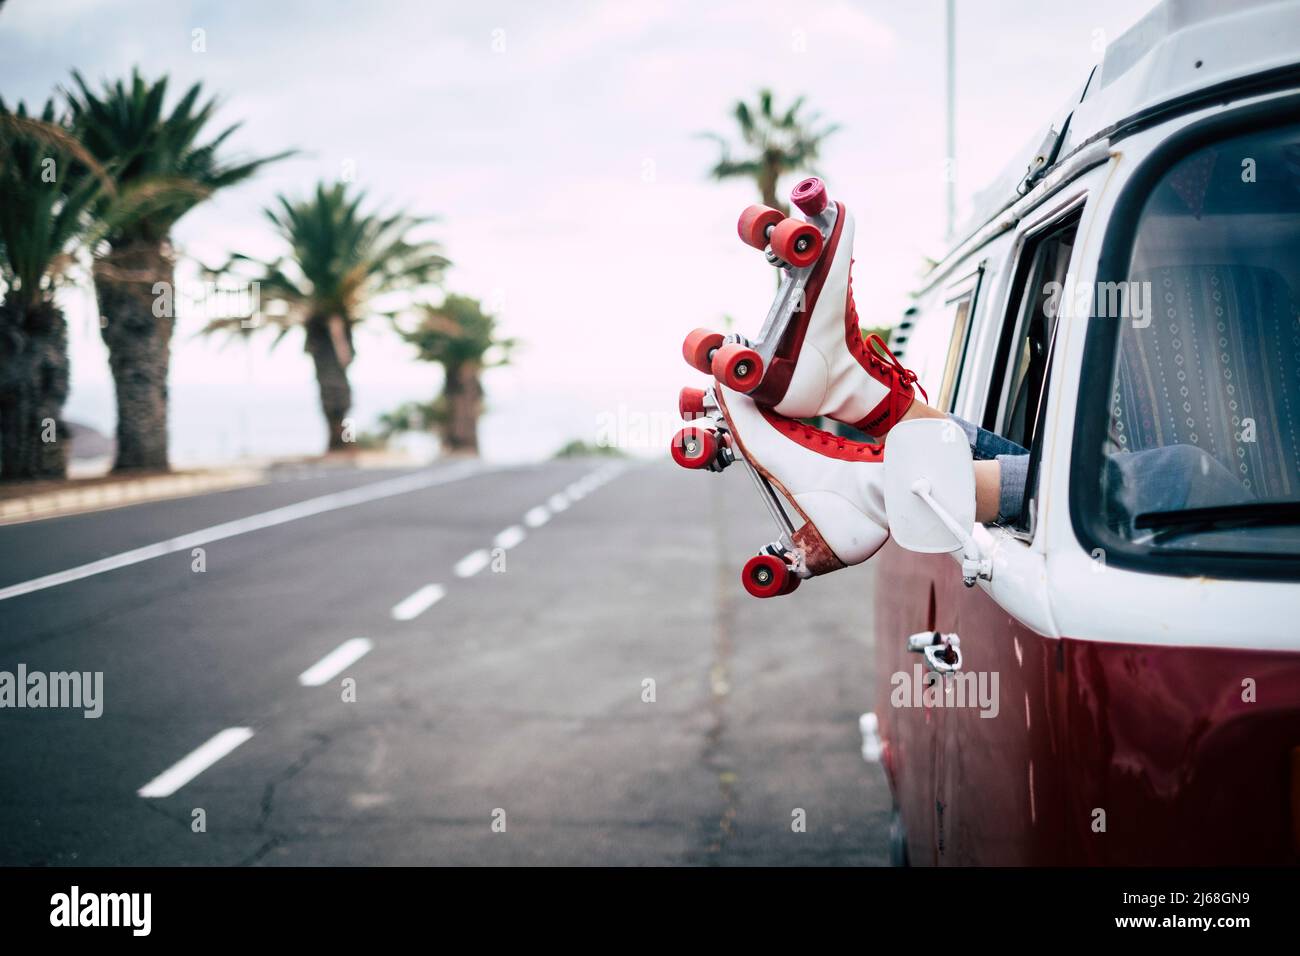 Travel and freedom concept with classic skate and van with long asphalt straight road in background. Old lifestyle alternative trendy. Red color. Peop Stock Photo